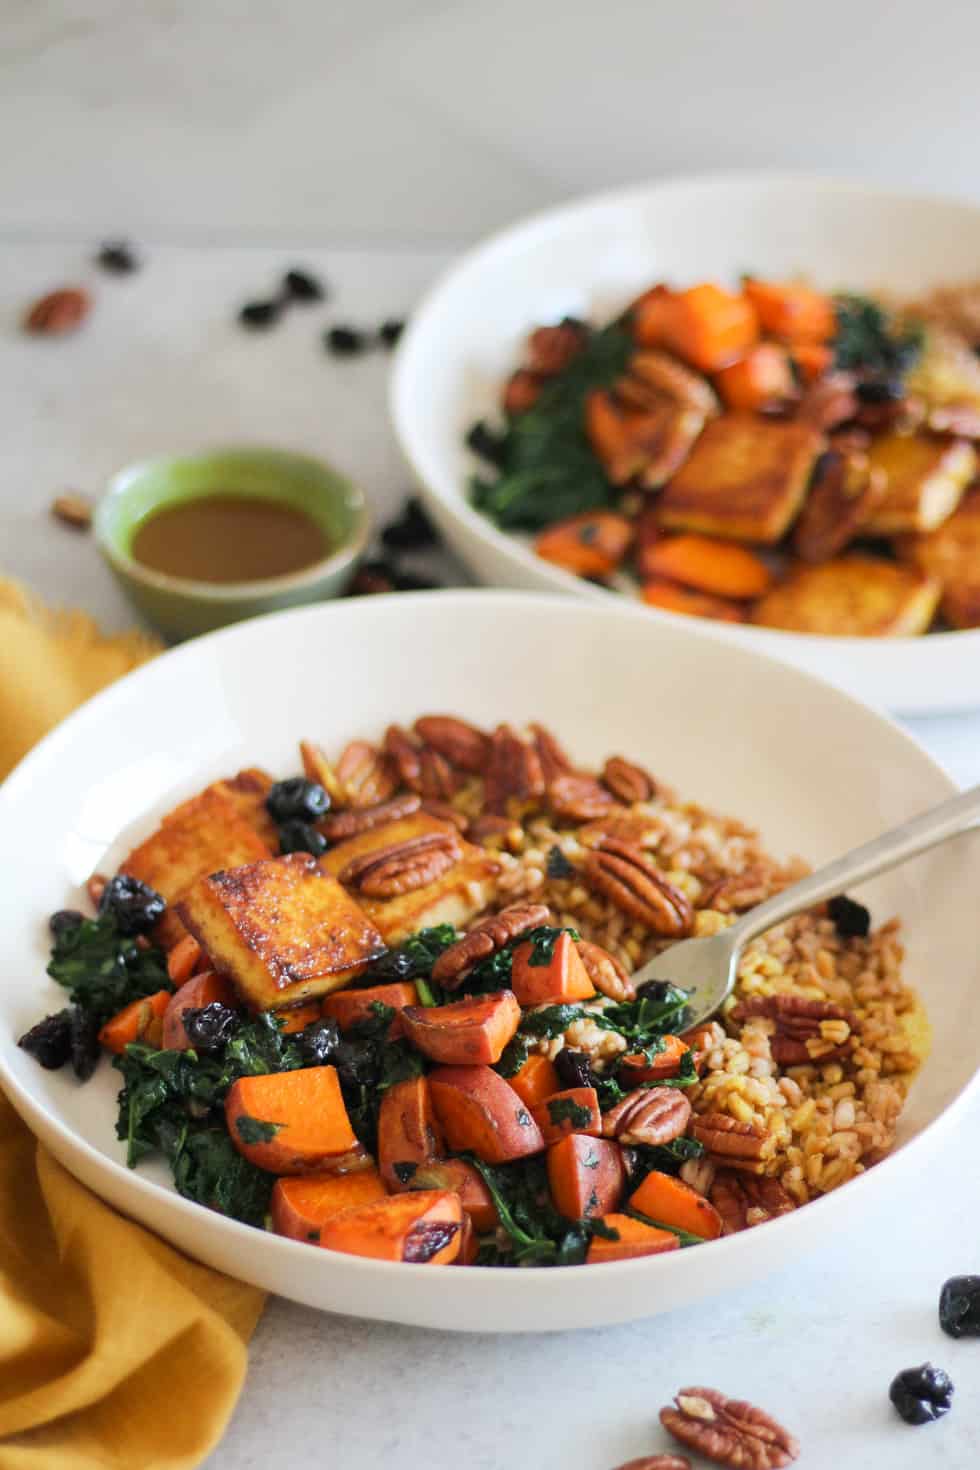 Baked Tofu Harvest Bowls with sweet potato and kale in white bowls with yellow napkin.